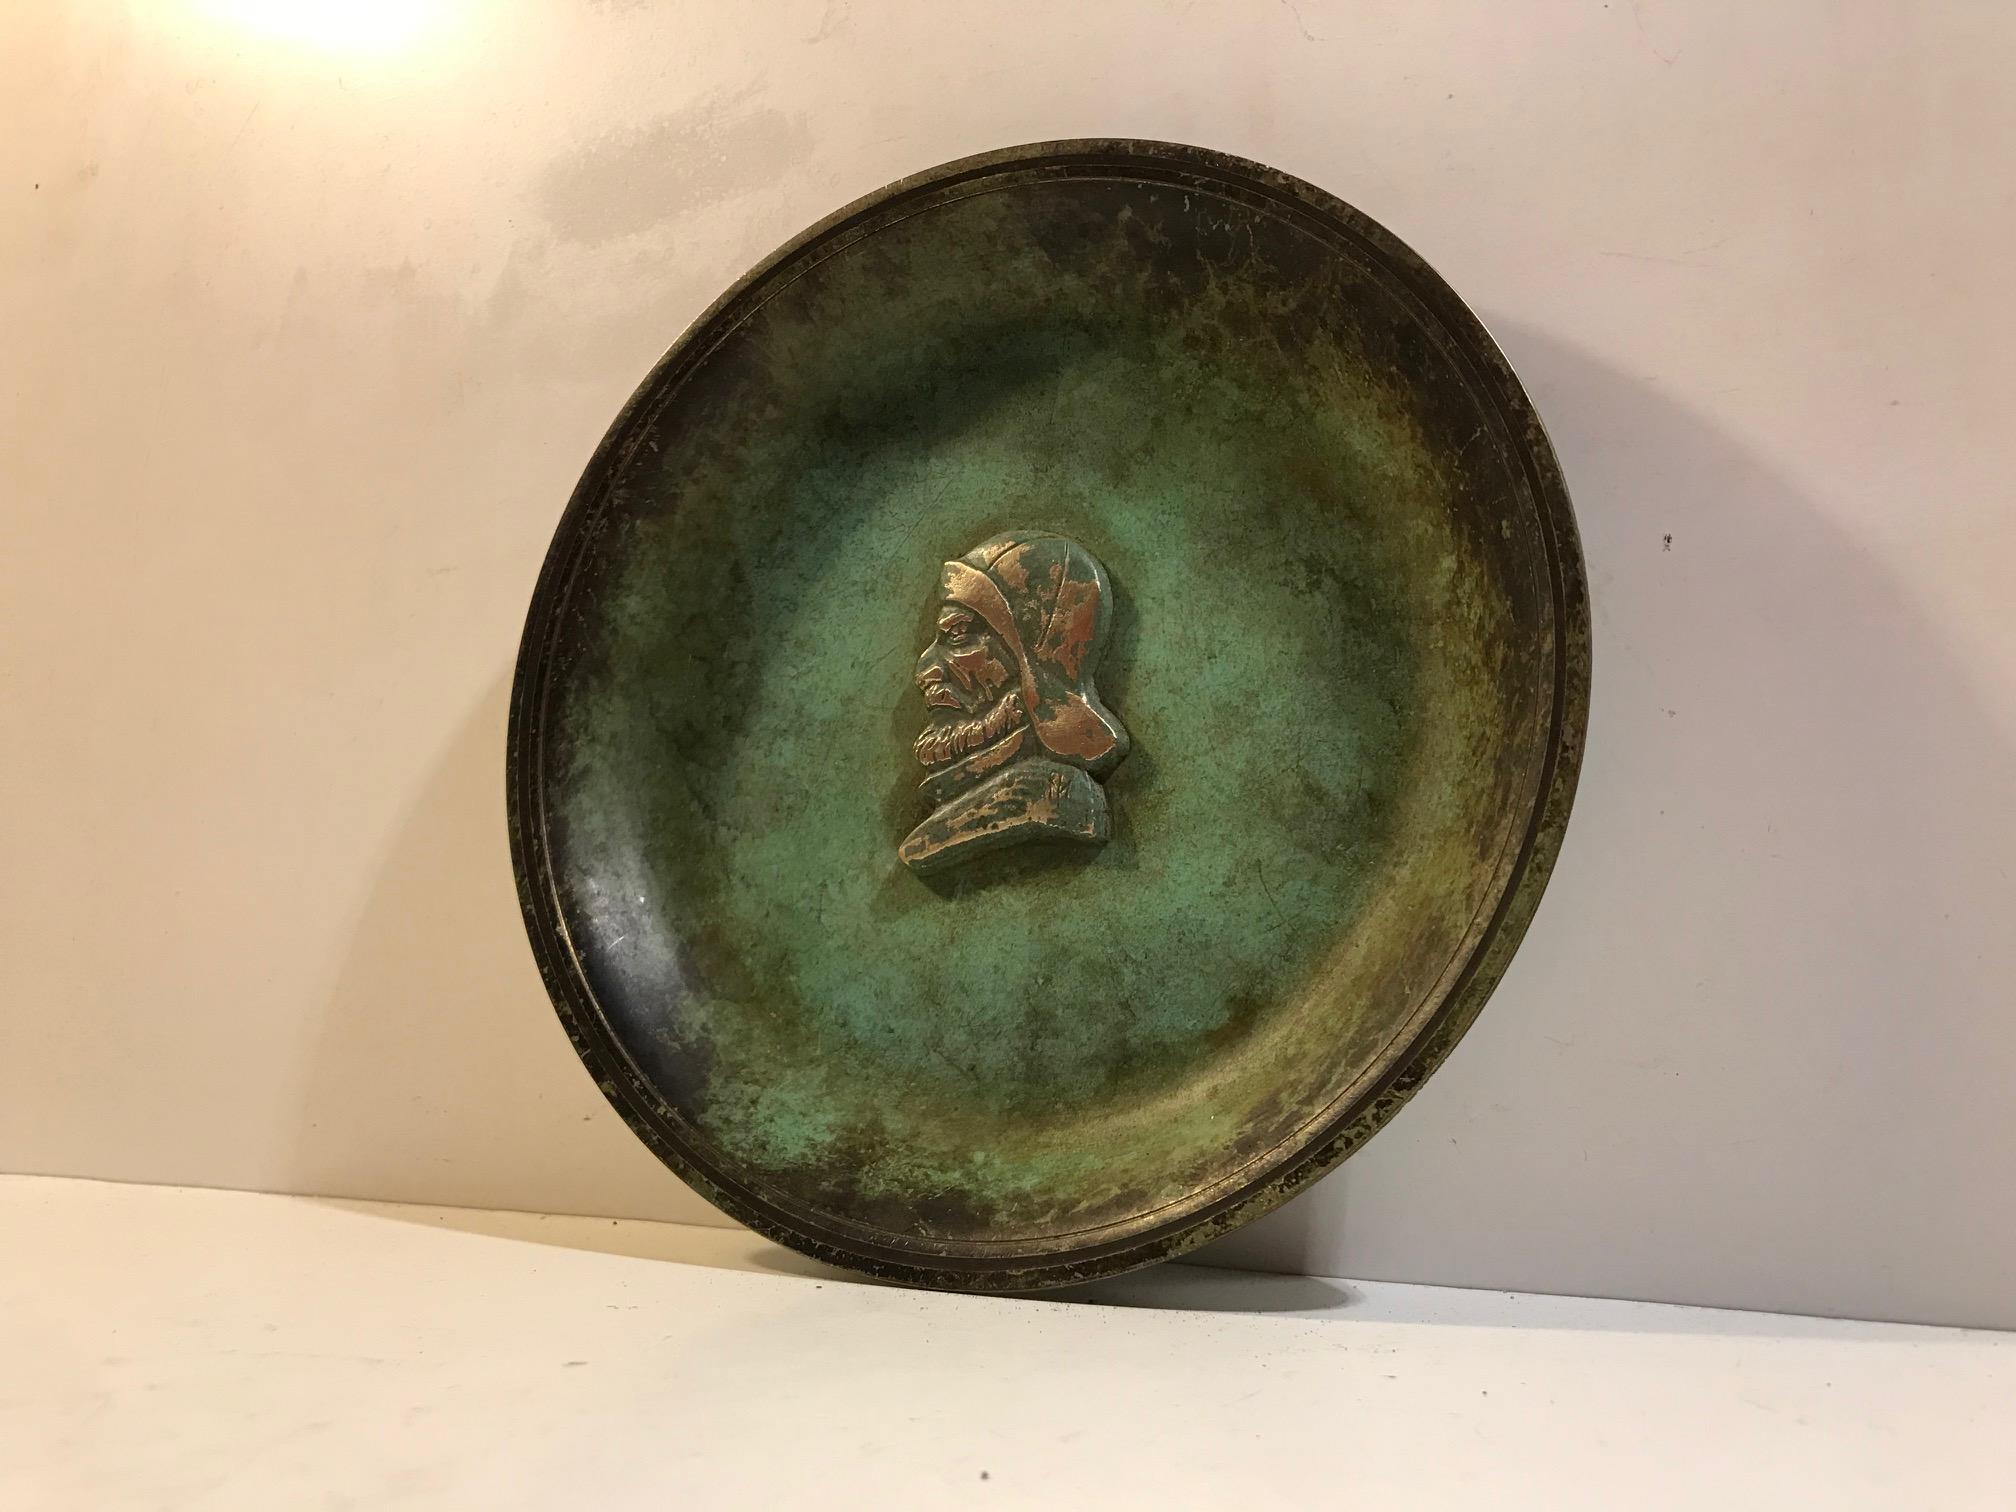 Stylized bronze dish with applied verdigris patina (cold paint). The center motif depicts a fisherman. Designed by J.F. Willumsen and manufactured by Tura in Denmark during the 1930s in a style reminiscent of Just Andersen and WMF.